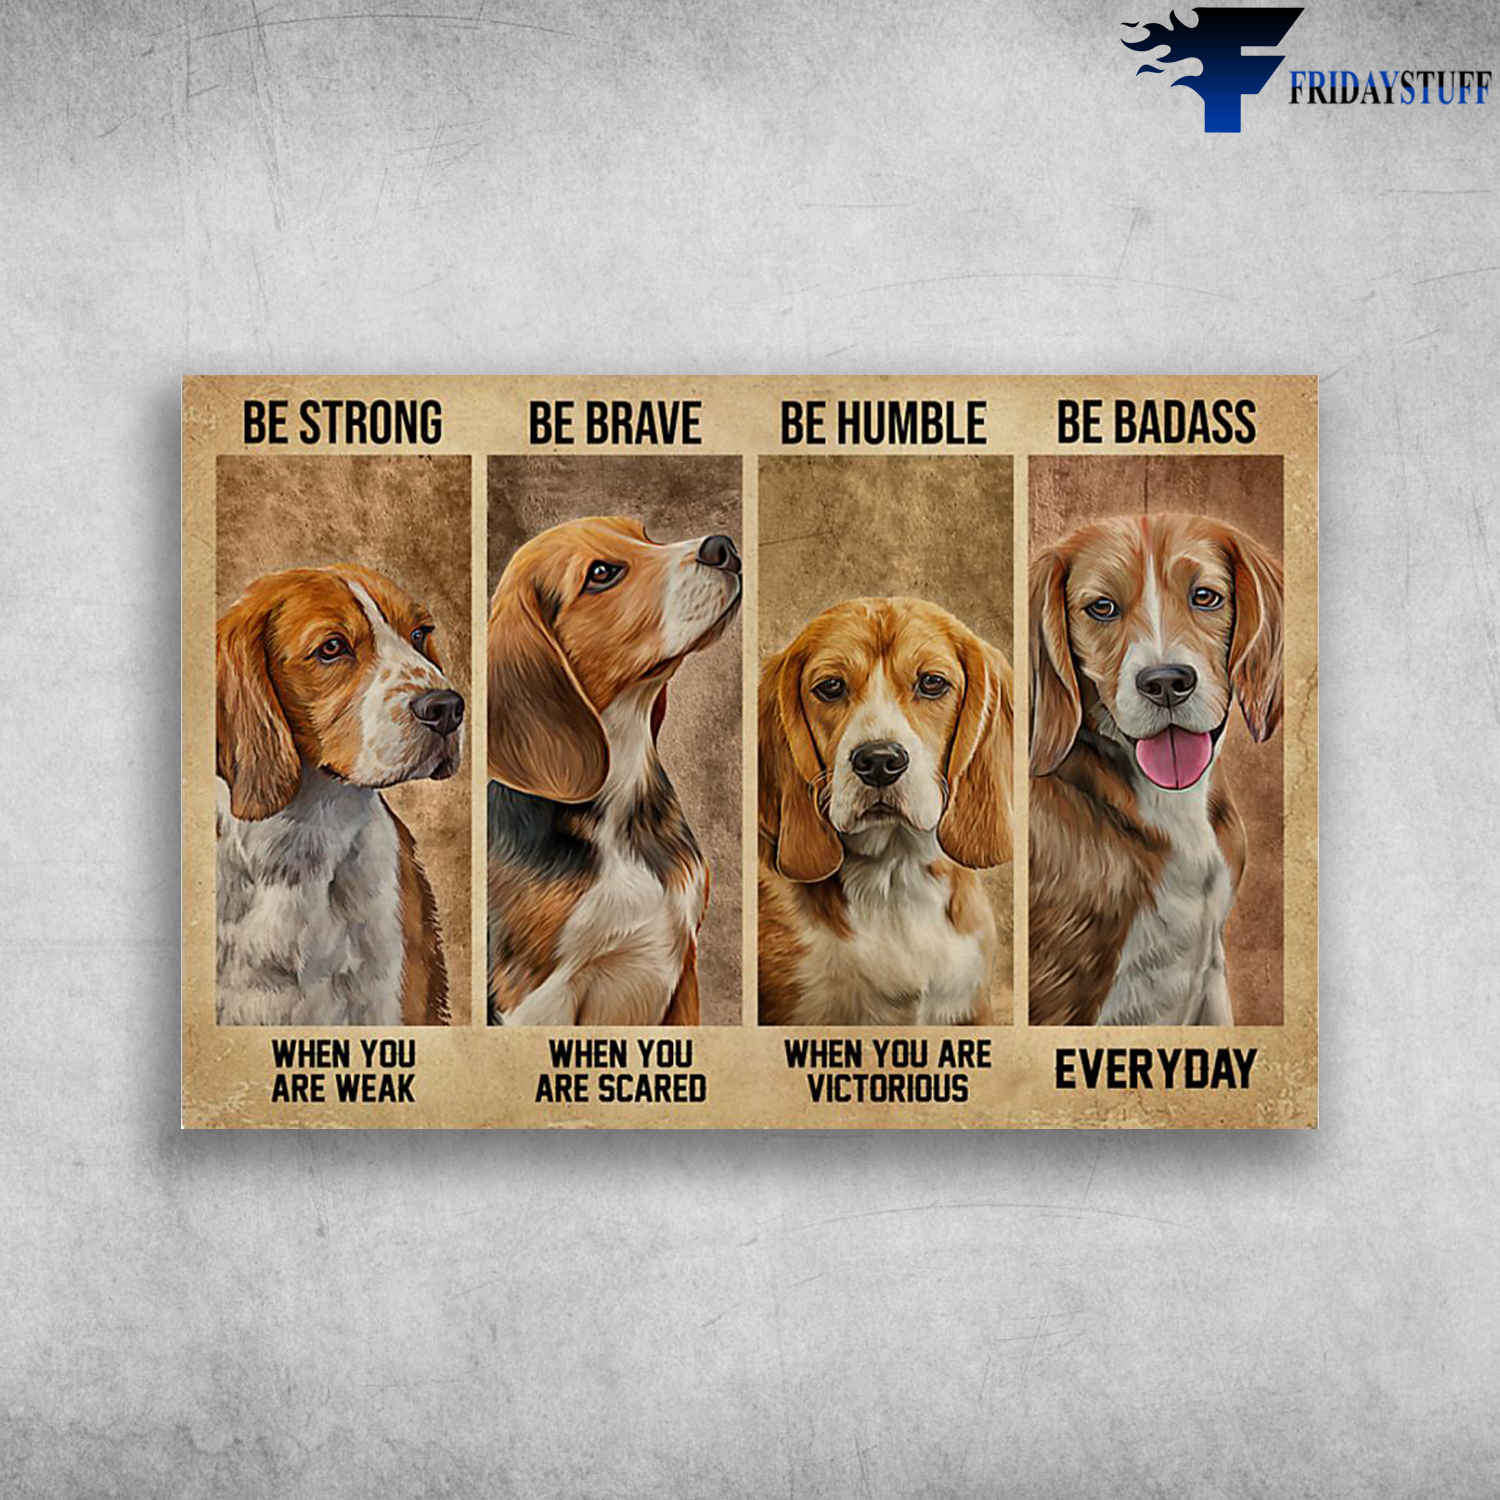 Beagle Dog - Be Strong When You Are Weak, Be Brave When You Are Scared